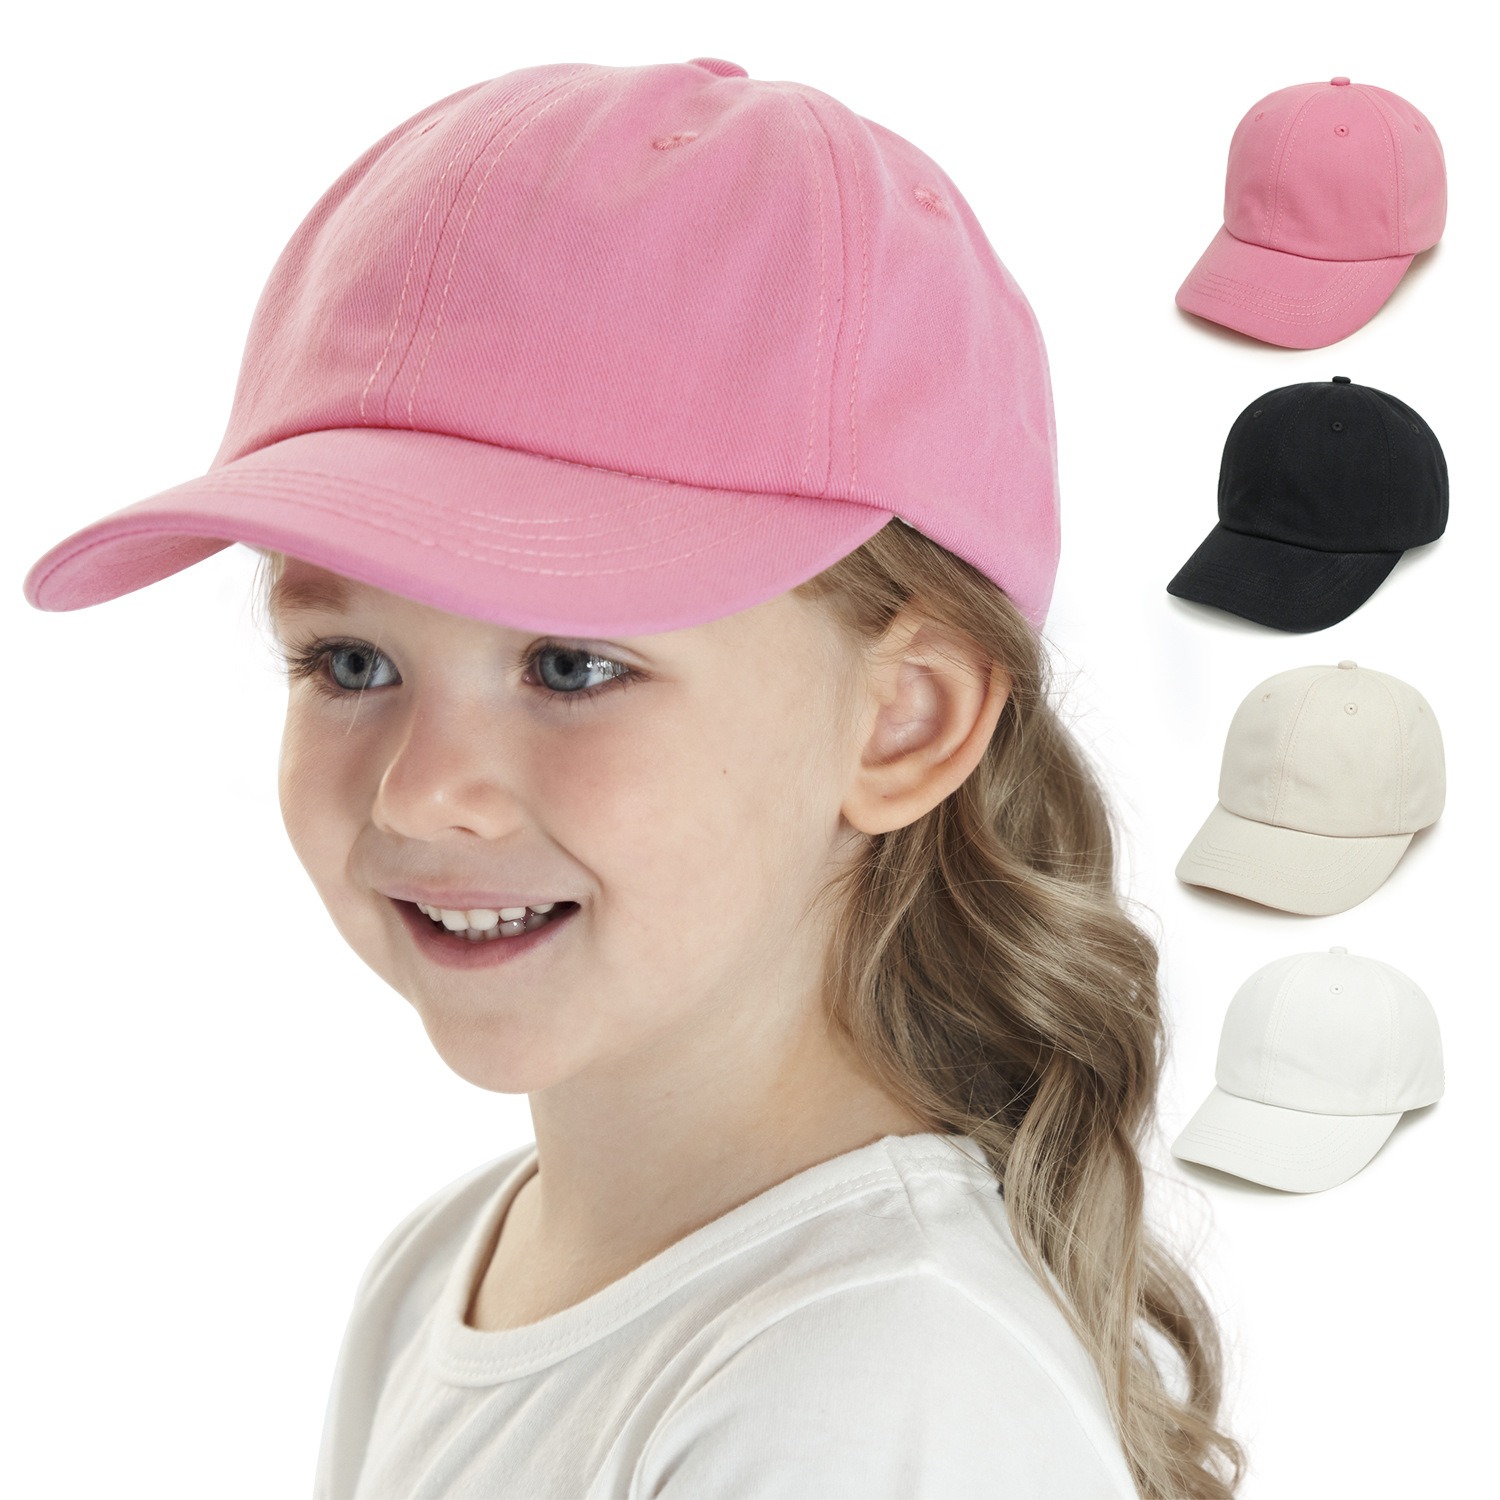 Baseball Cap Children’s New Outdoor Casual Hundred Take The Duck Tongue Hat Solid Color Curved Brim Sun Hat 9 Colors